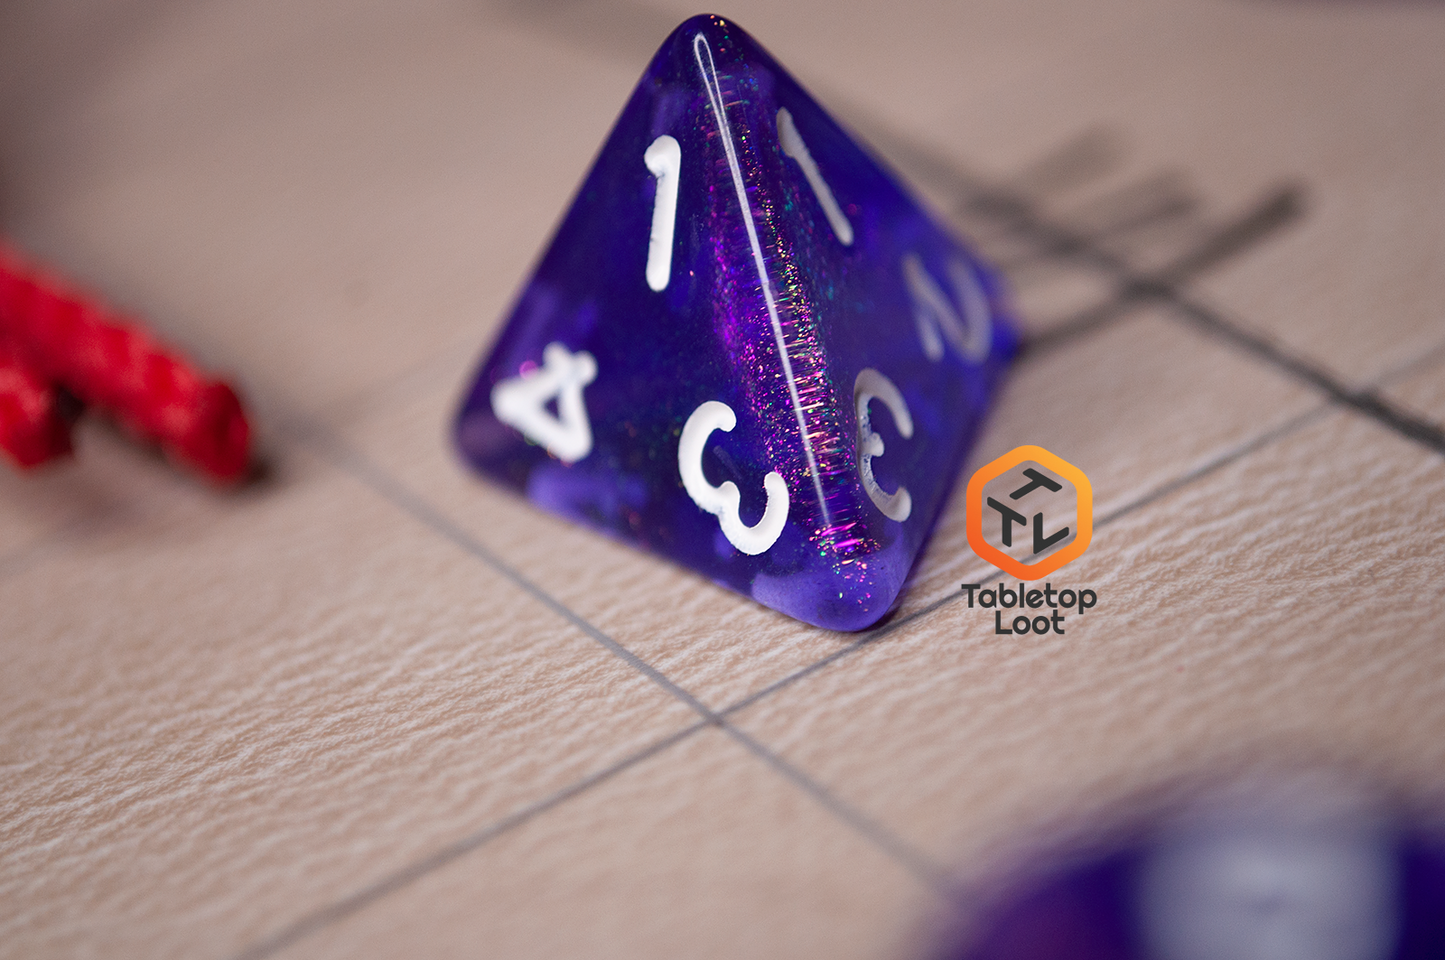 A close up of the D4 from the Diamond Purple 7 piece dice set from Tabletop Loot with purple dice filled with micro glitter and white numbering.